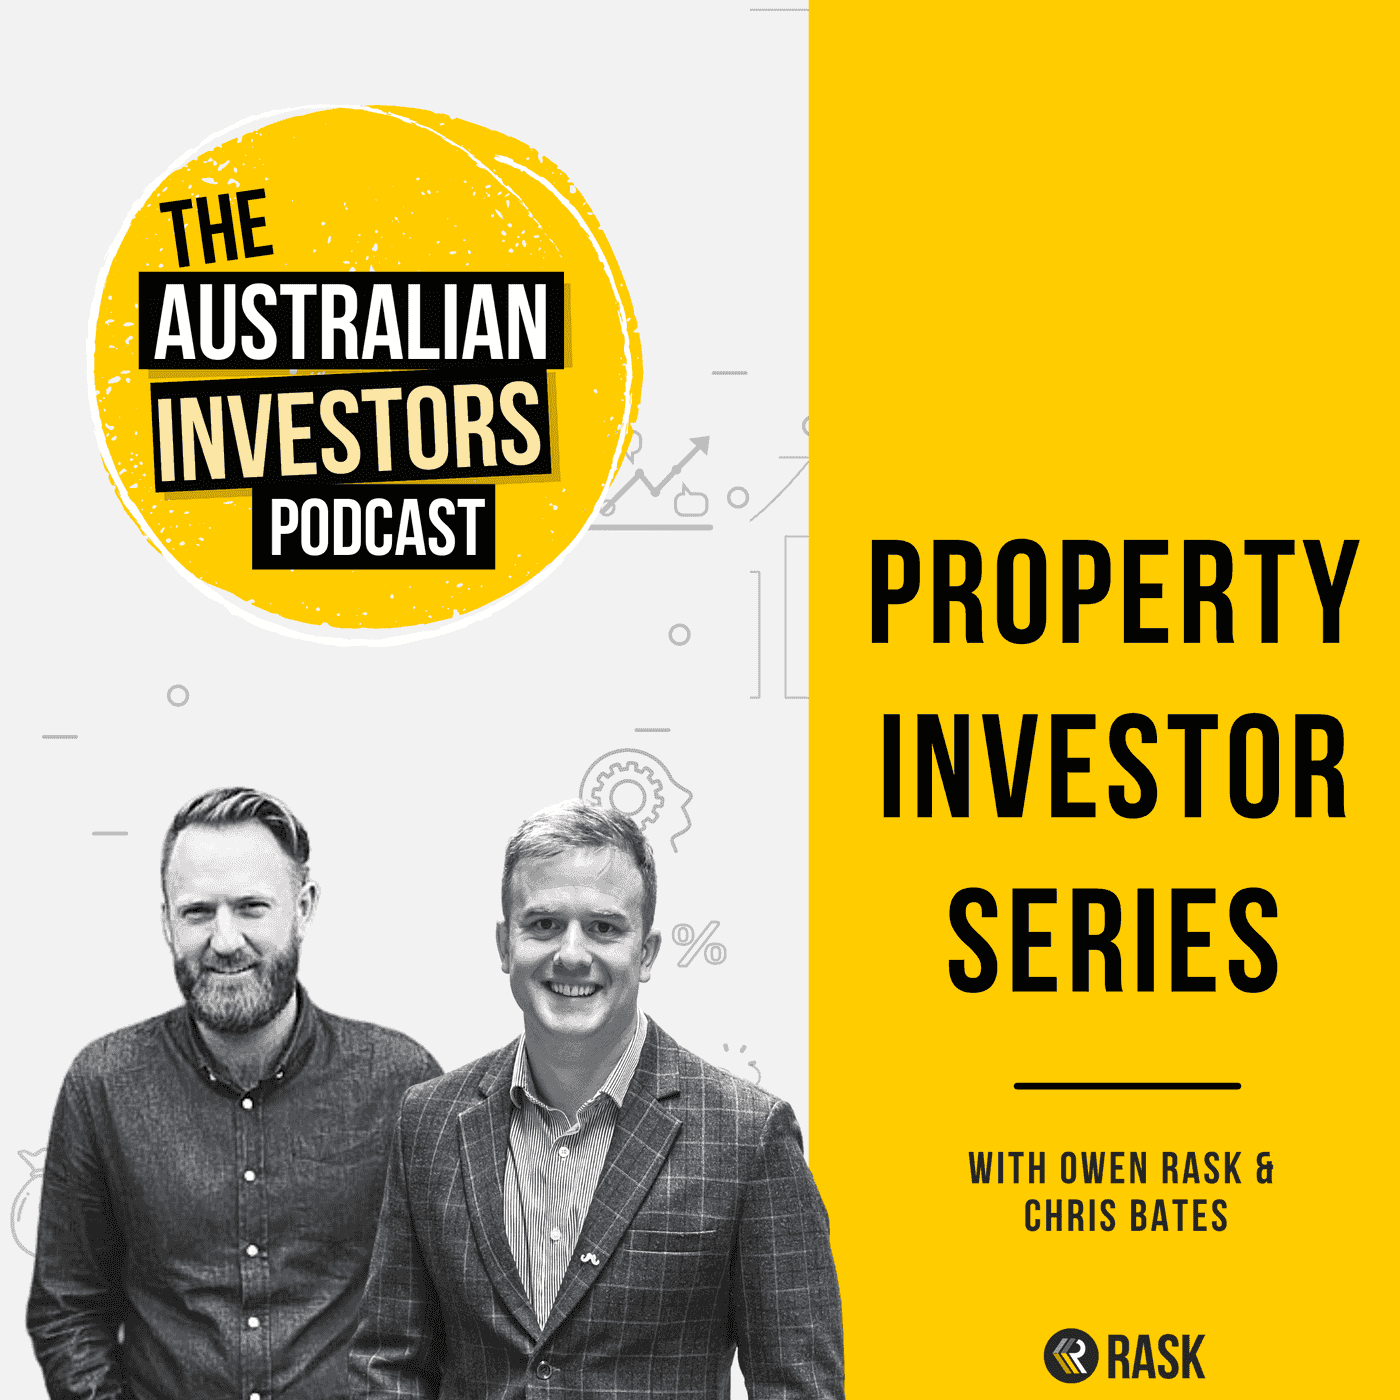 🏚 Property Investing 101 | Property Investor series [1/5]